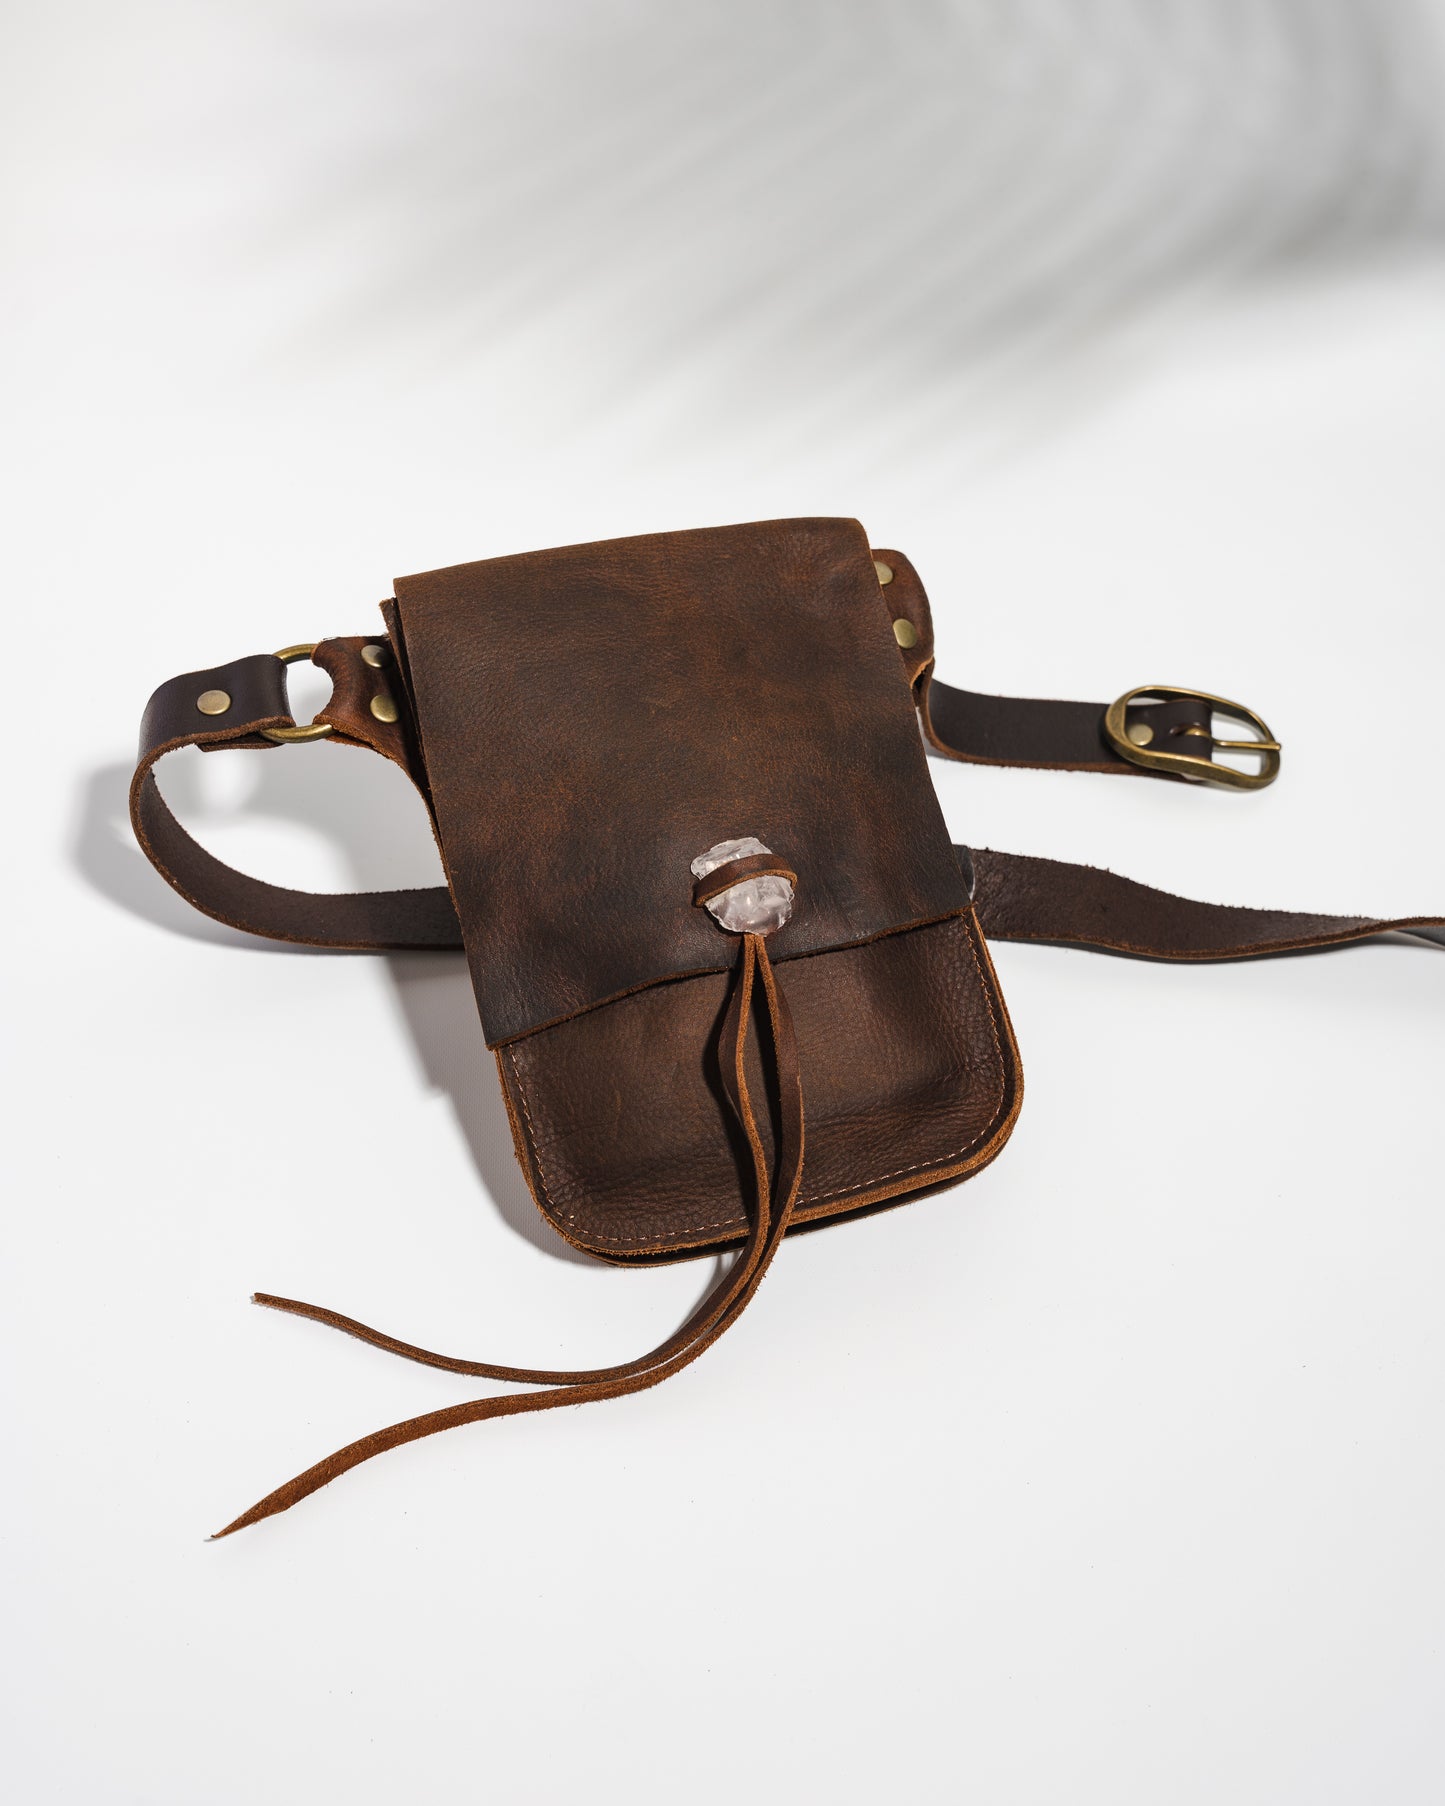 The Lover’s Leather Hip Bag